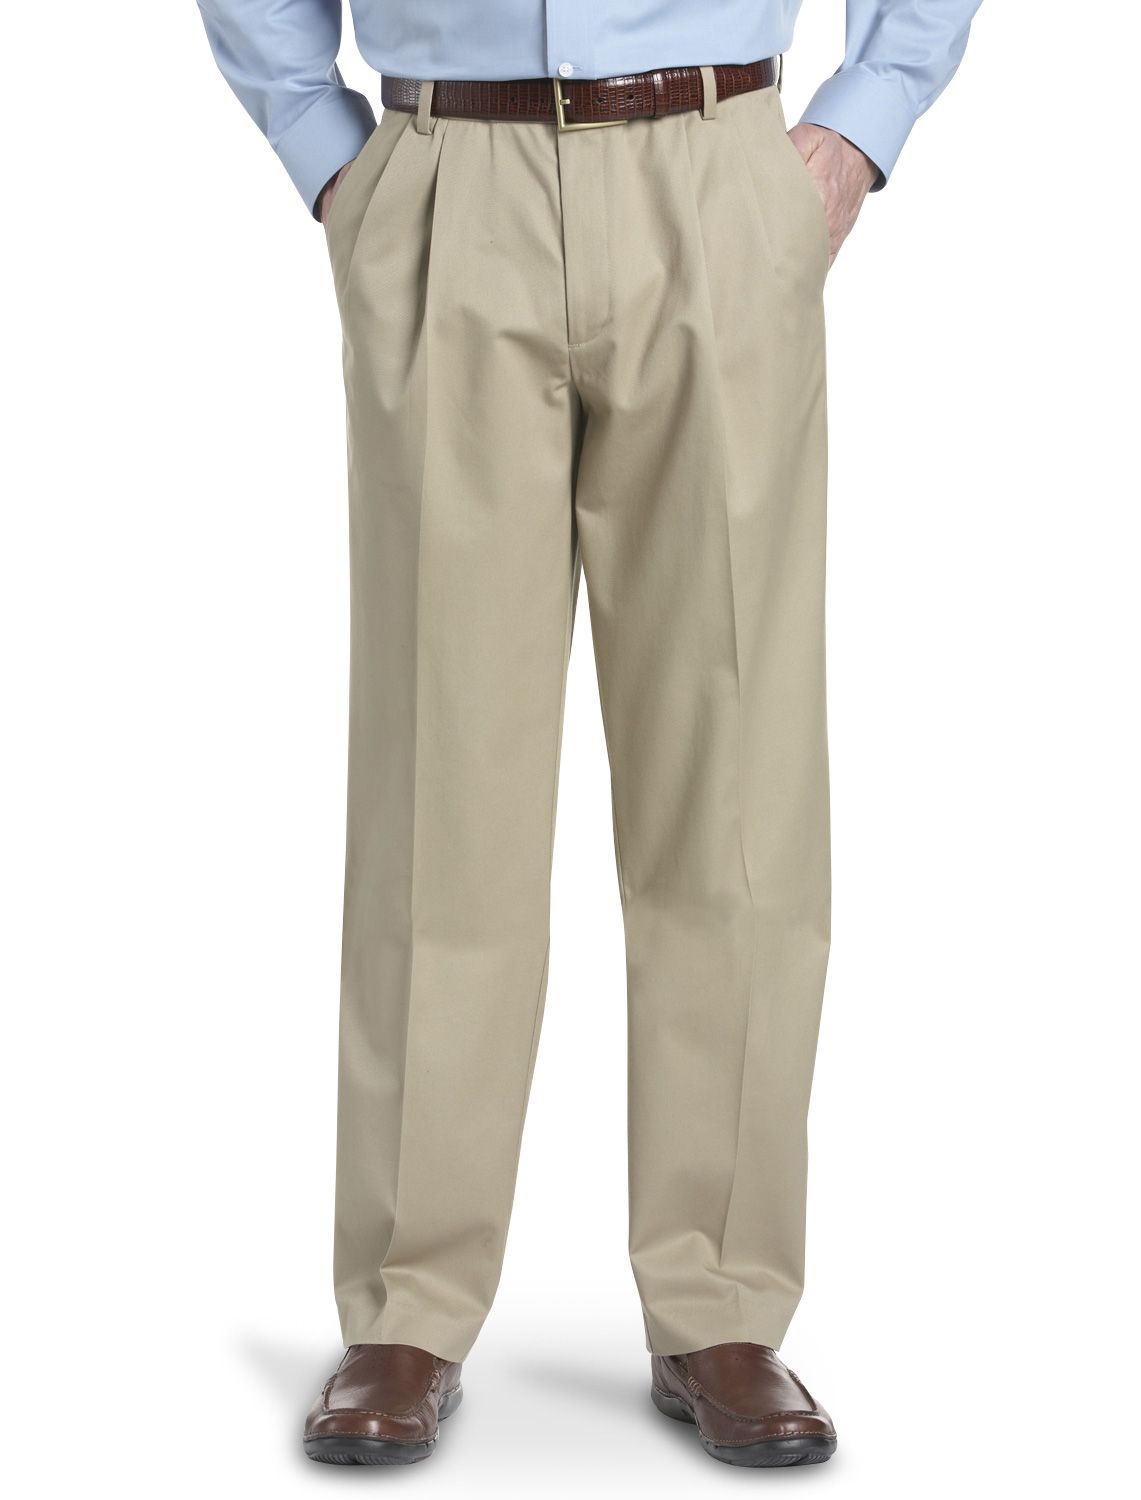 Covington Men's Twill Pants with Extended Waistband - Clothing, Shoes ...